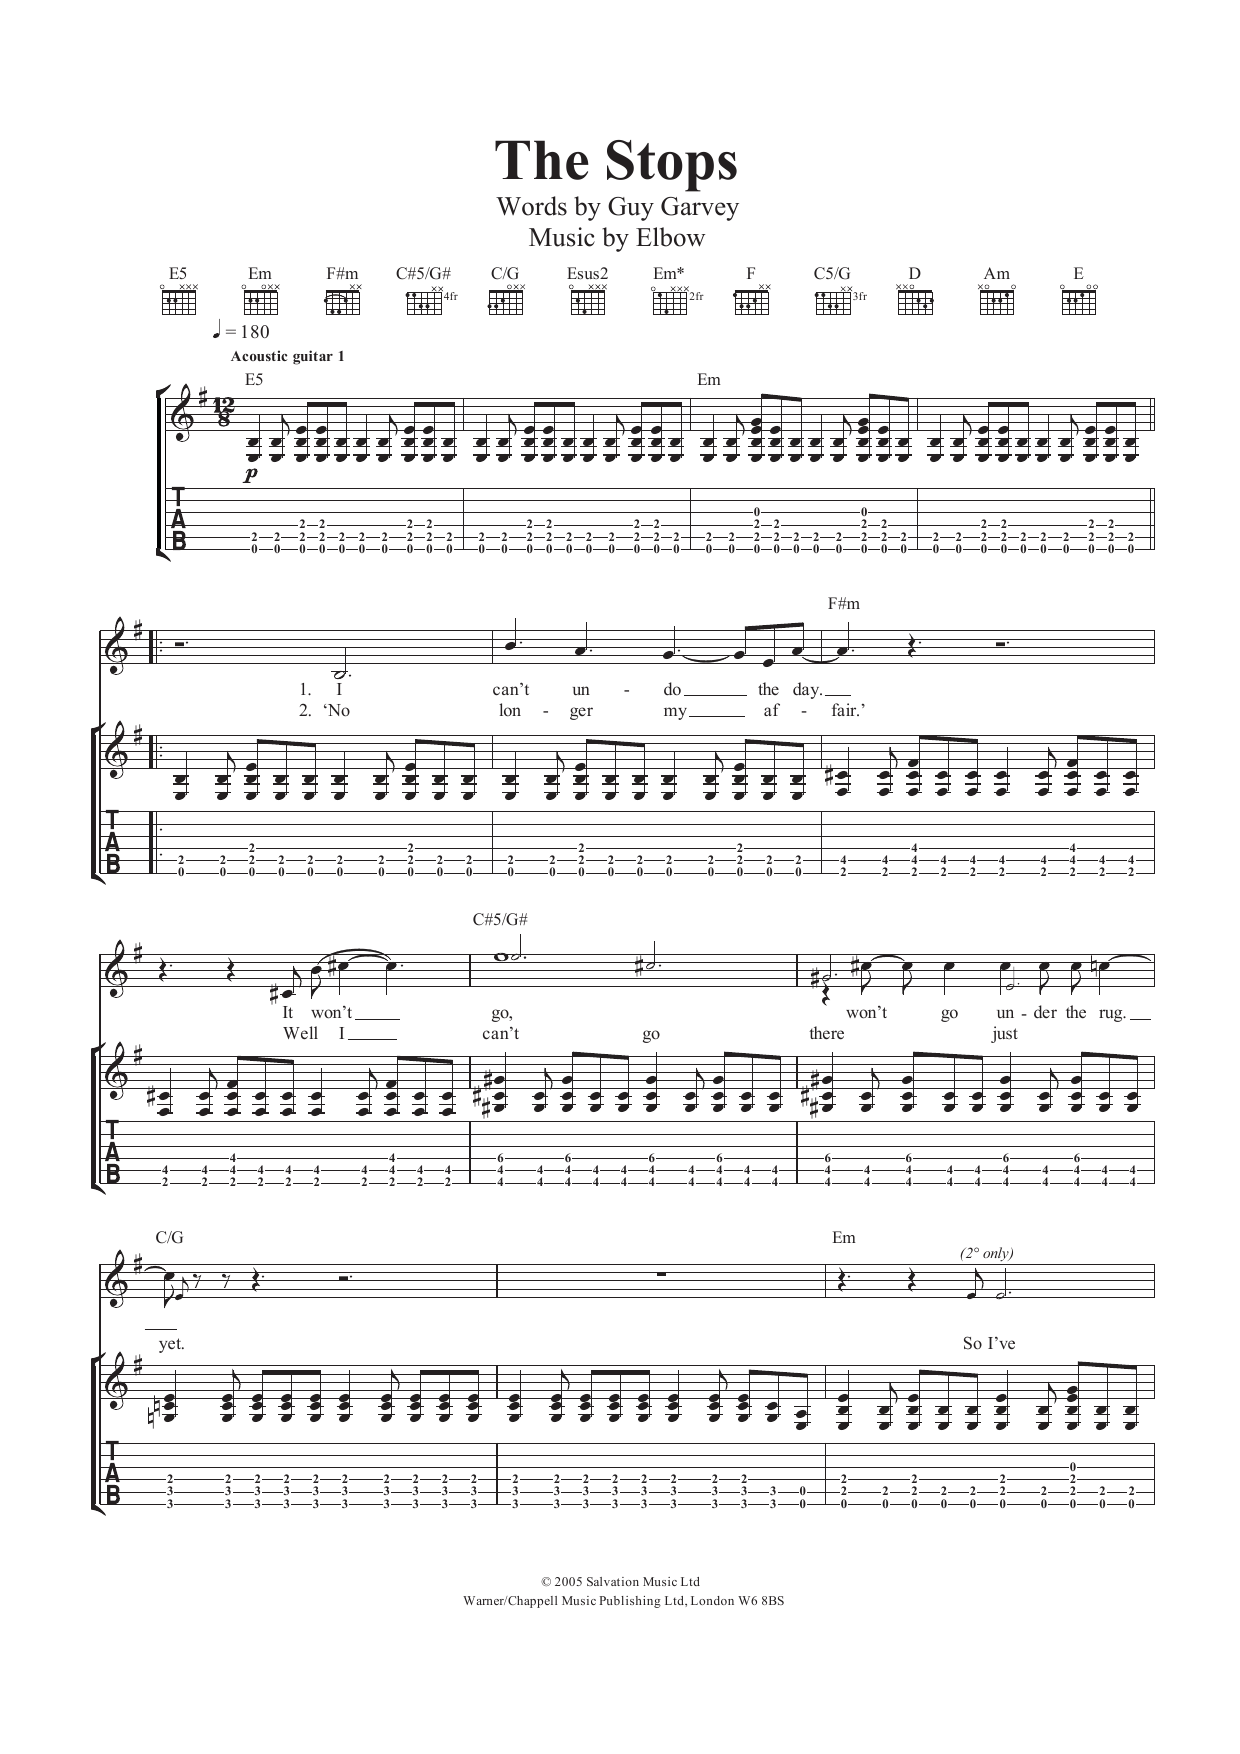 Download Elbow The Stops Sheet Music